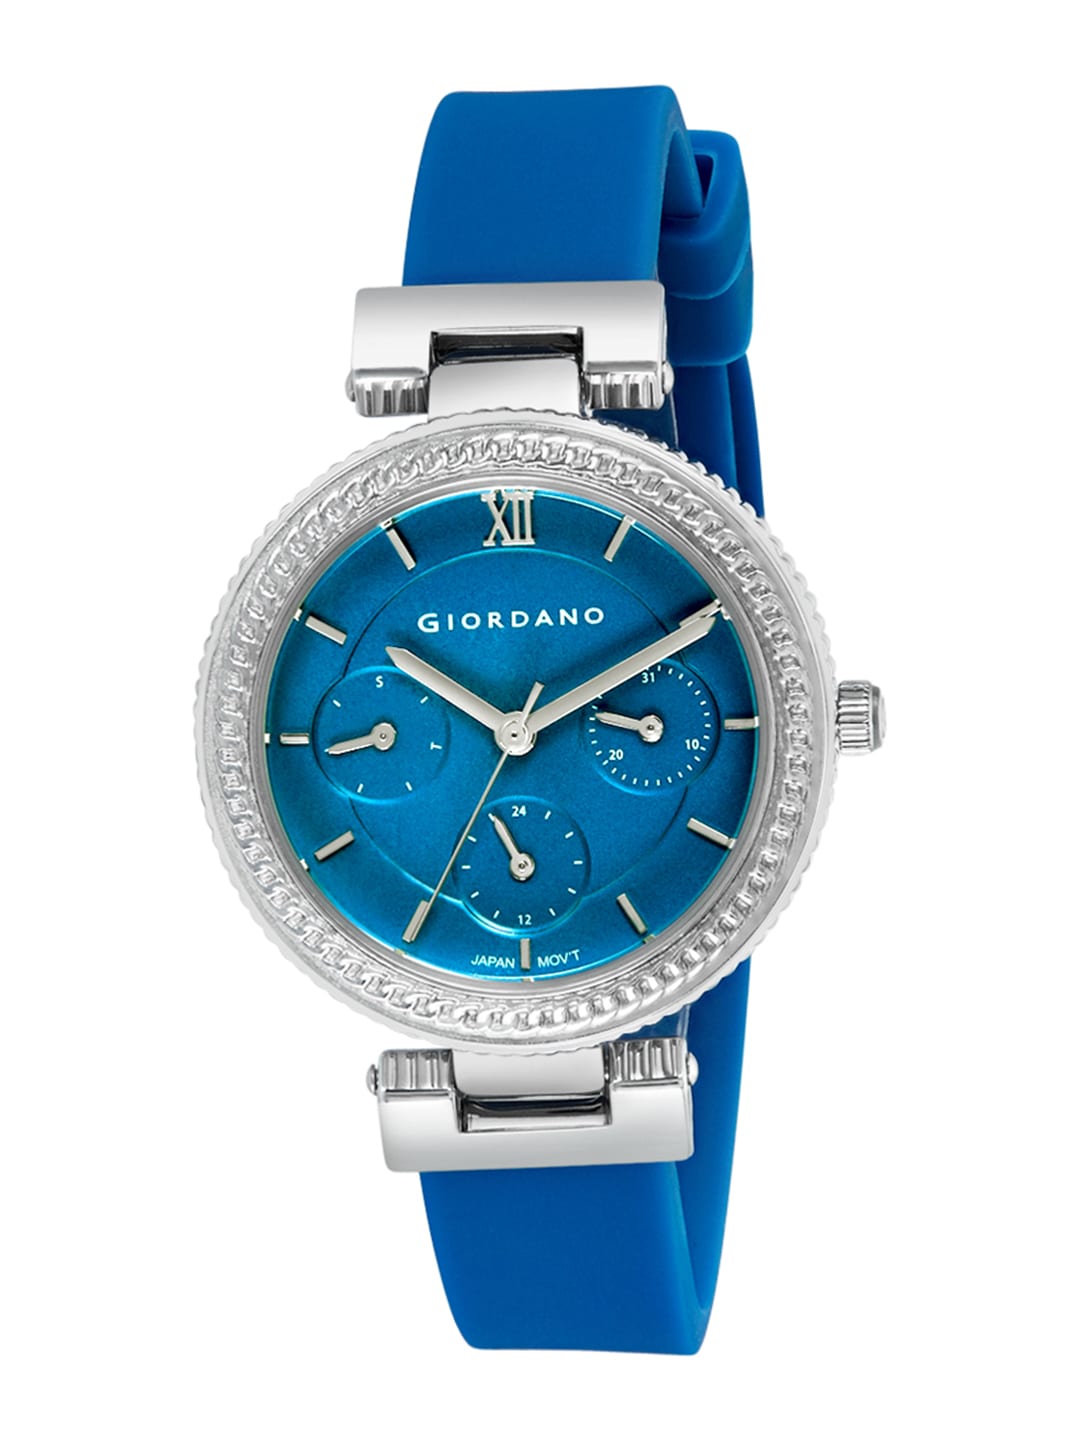 GIORDANO Women Blue Leather Analogue Watch 2937-02 Price in India